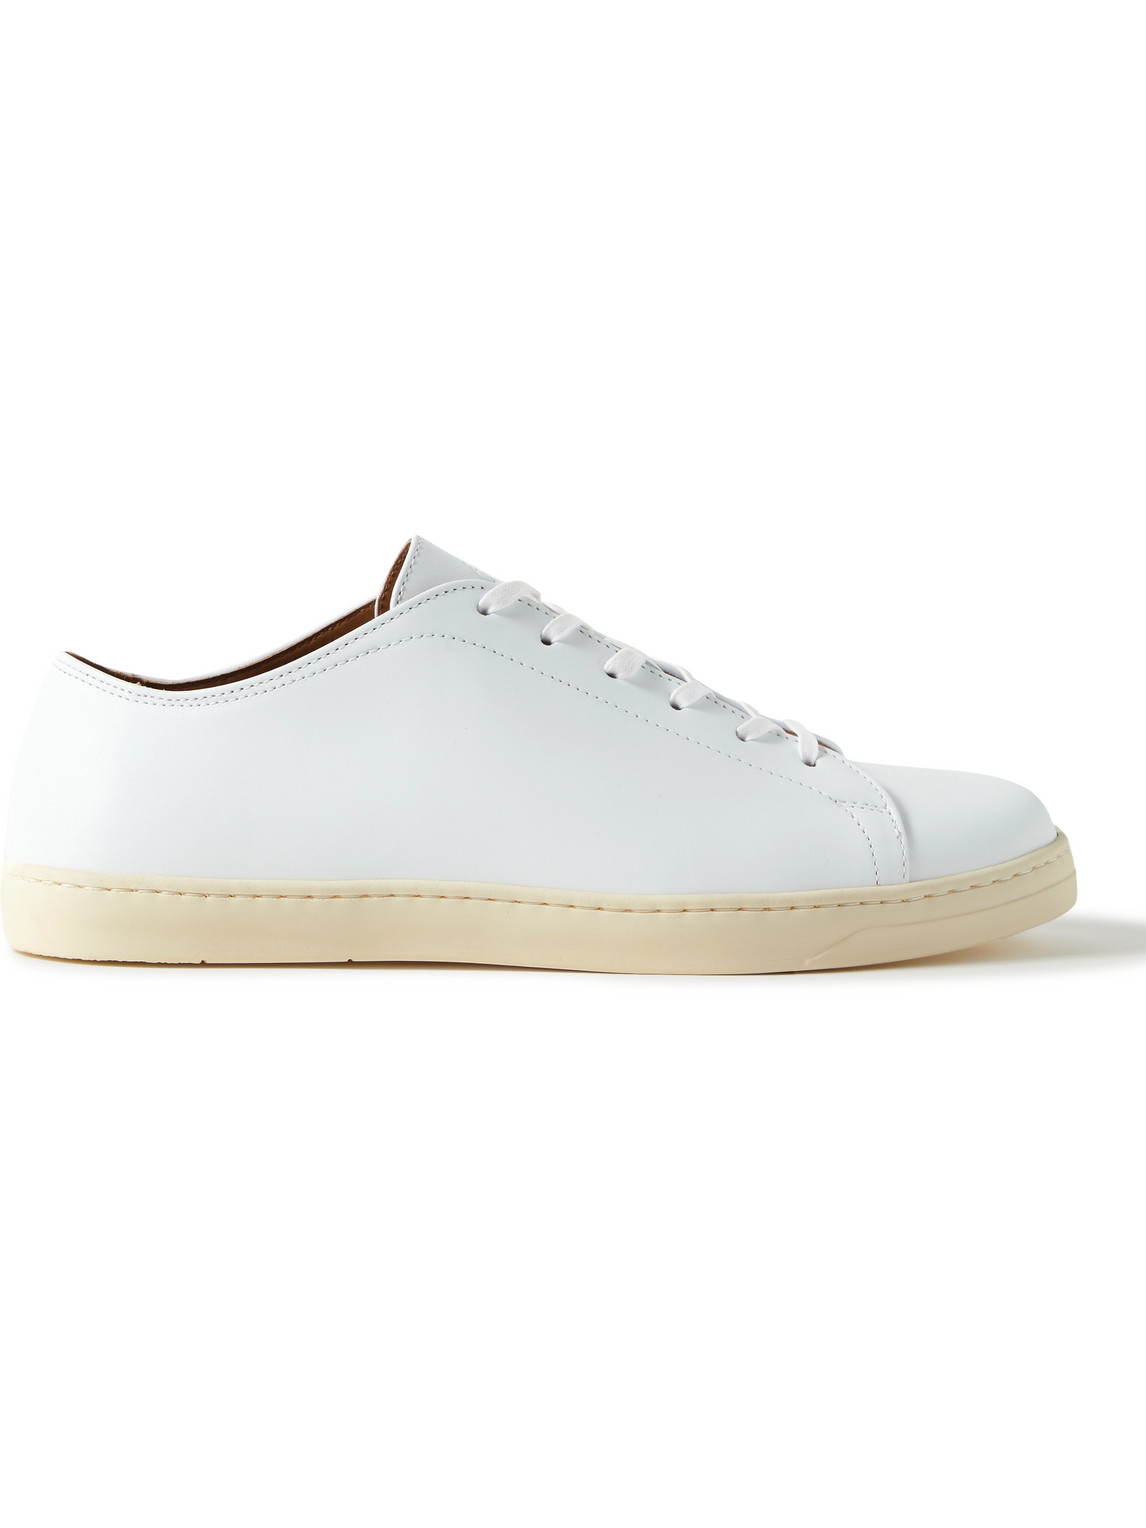 George Cleverley Leather Sneakers In White